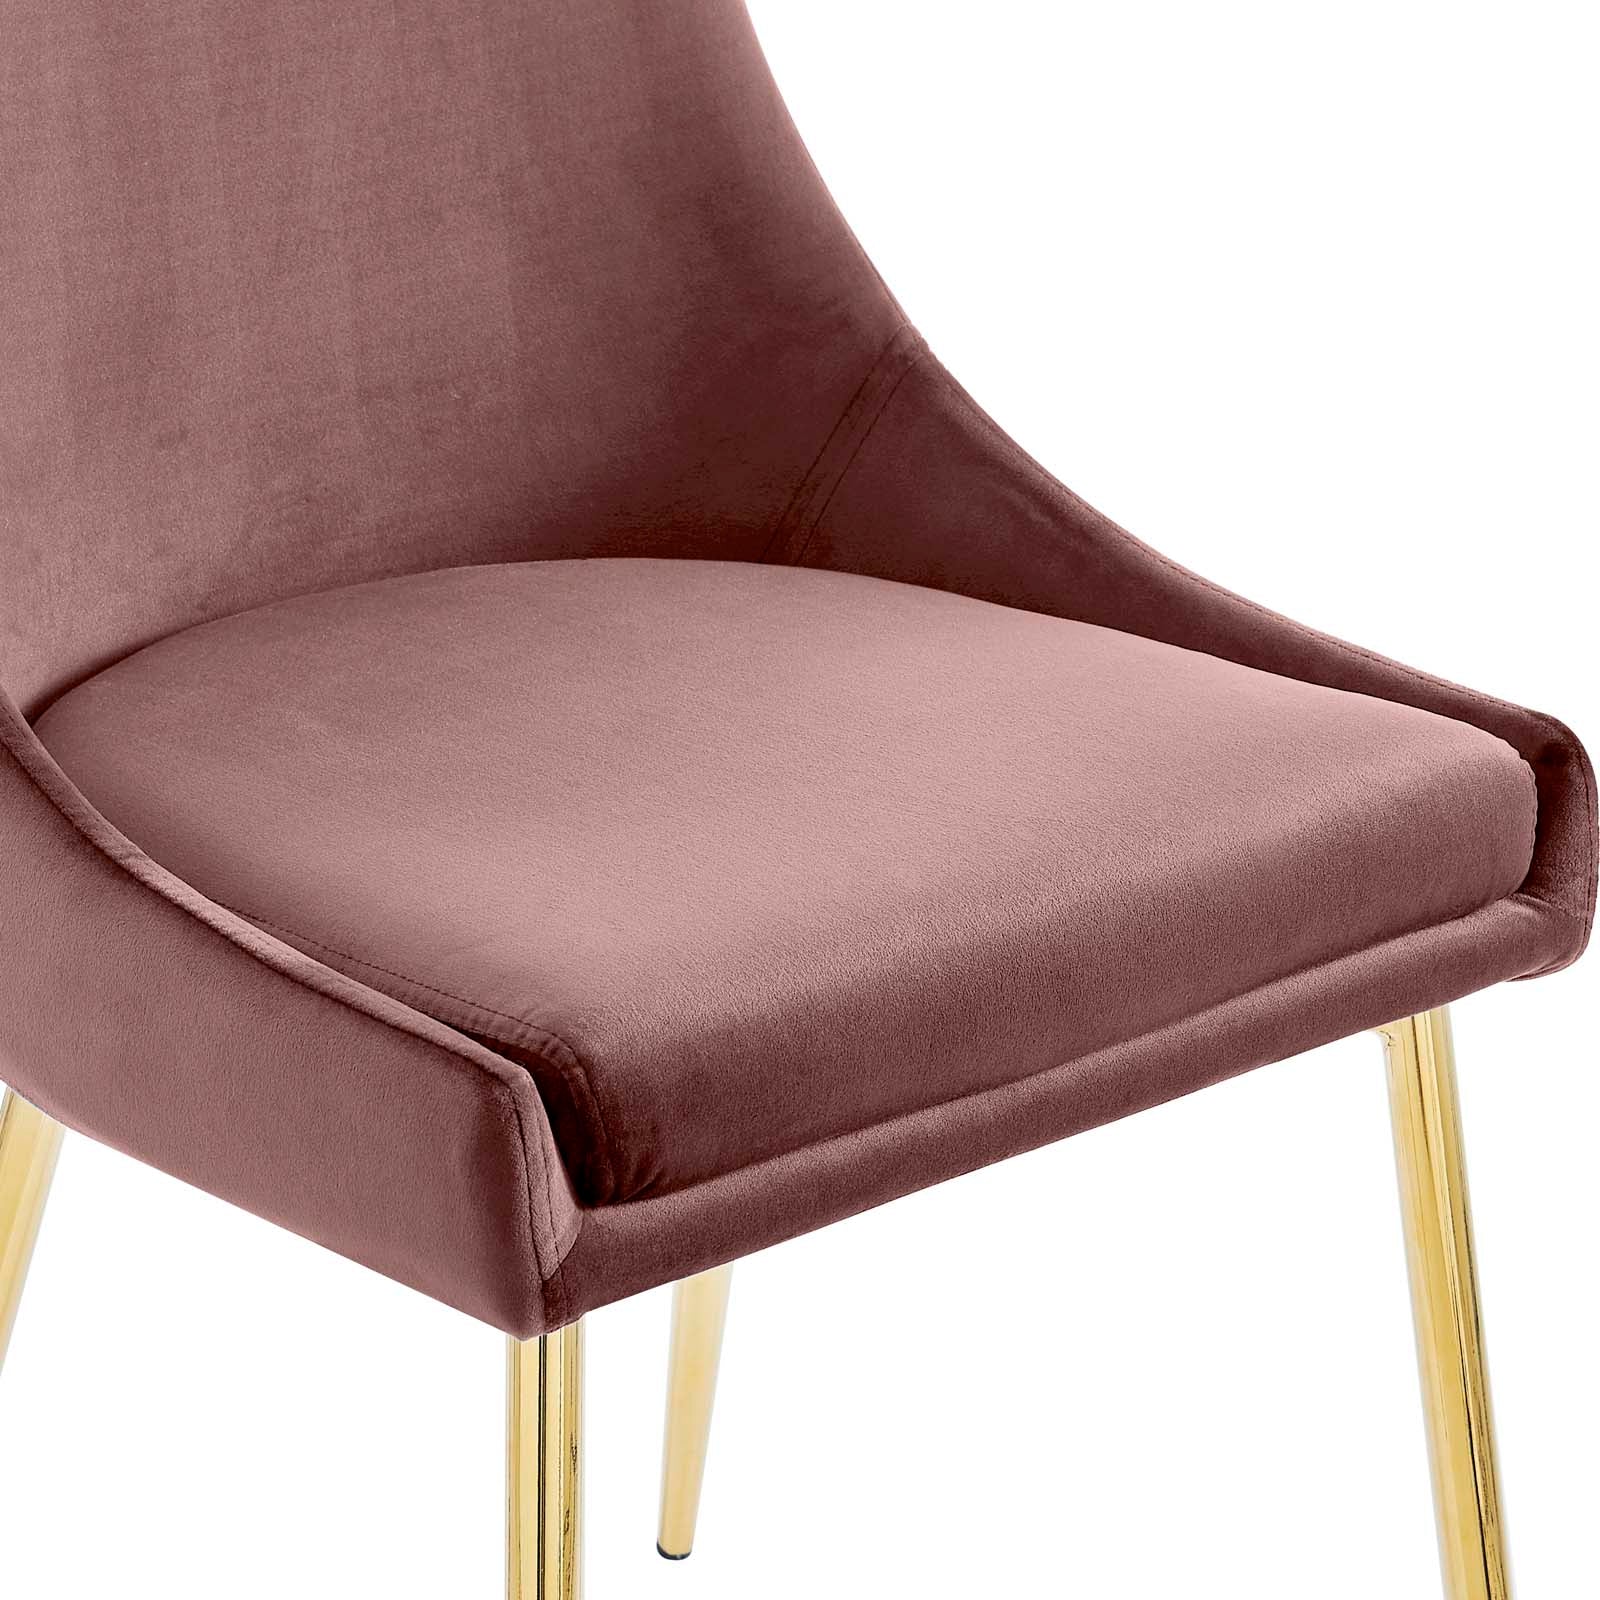 Modway Dining Chairs - Viscount Performance Velvet Dining Chairs - Set of 2 Gold Dusty Rose